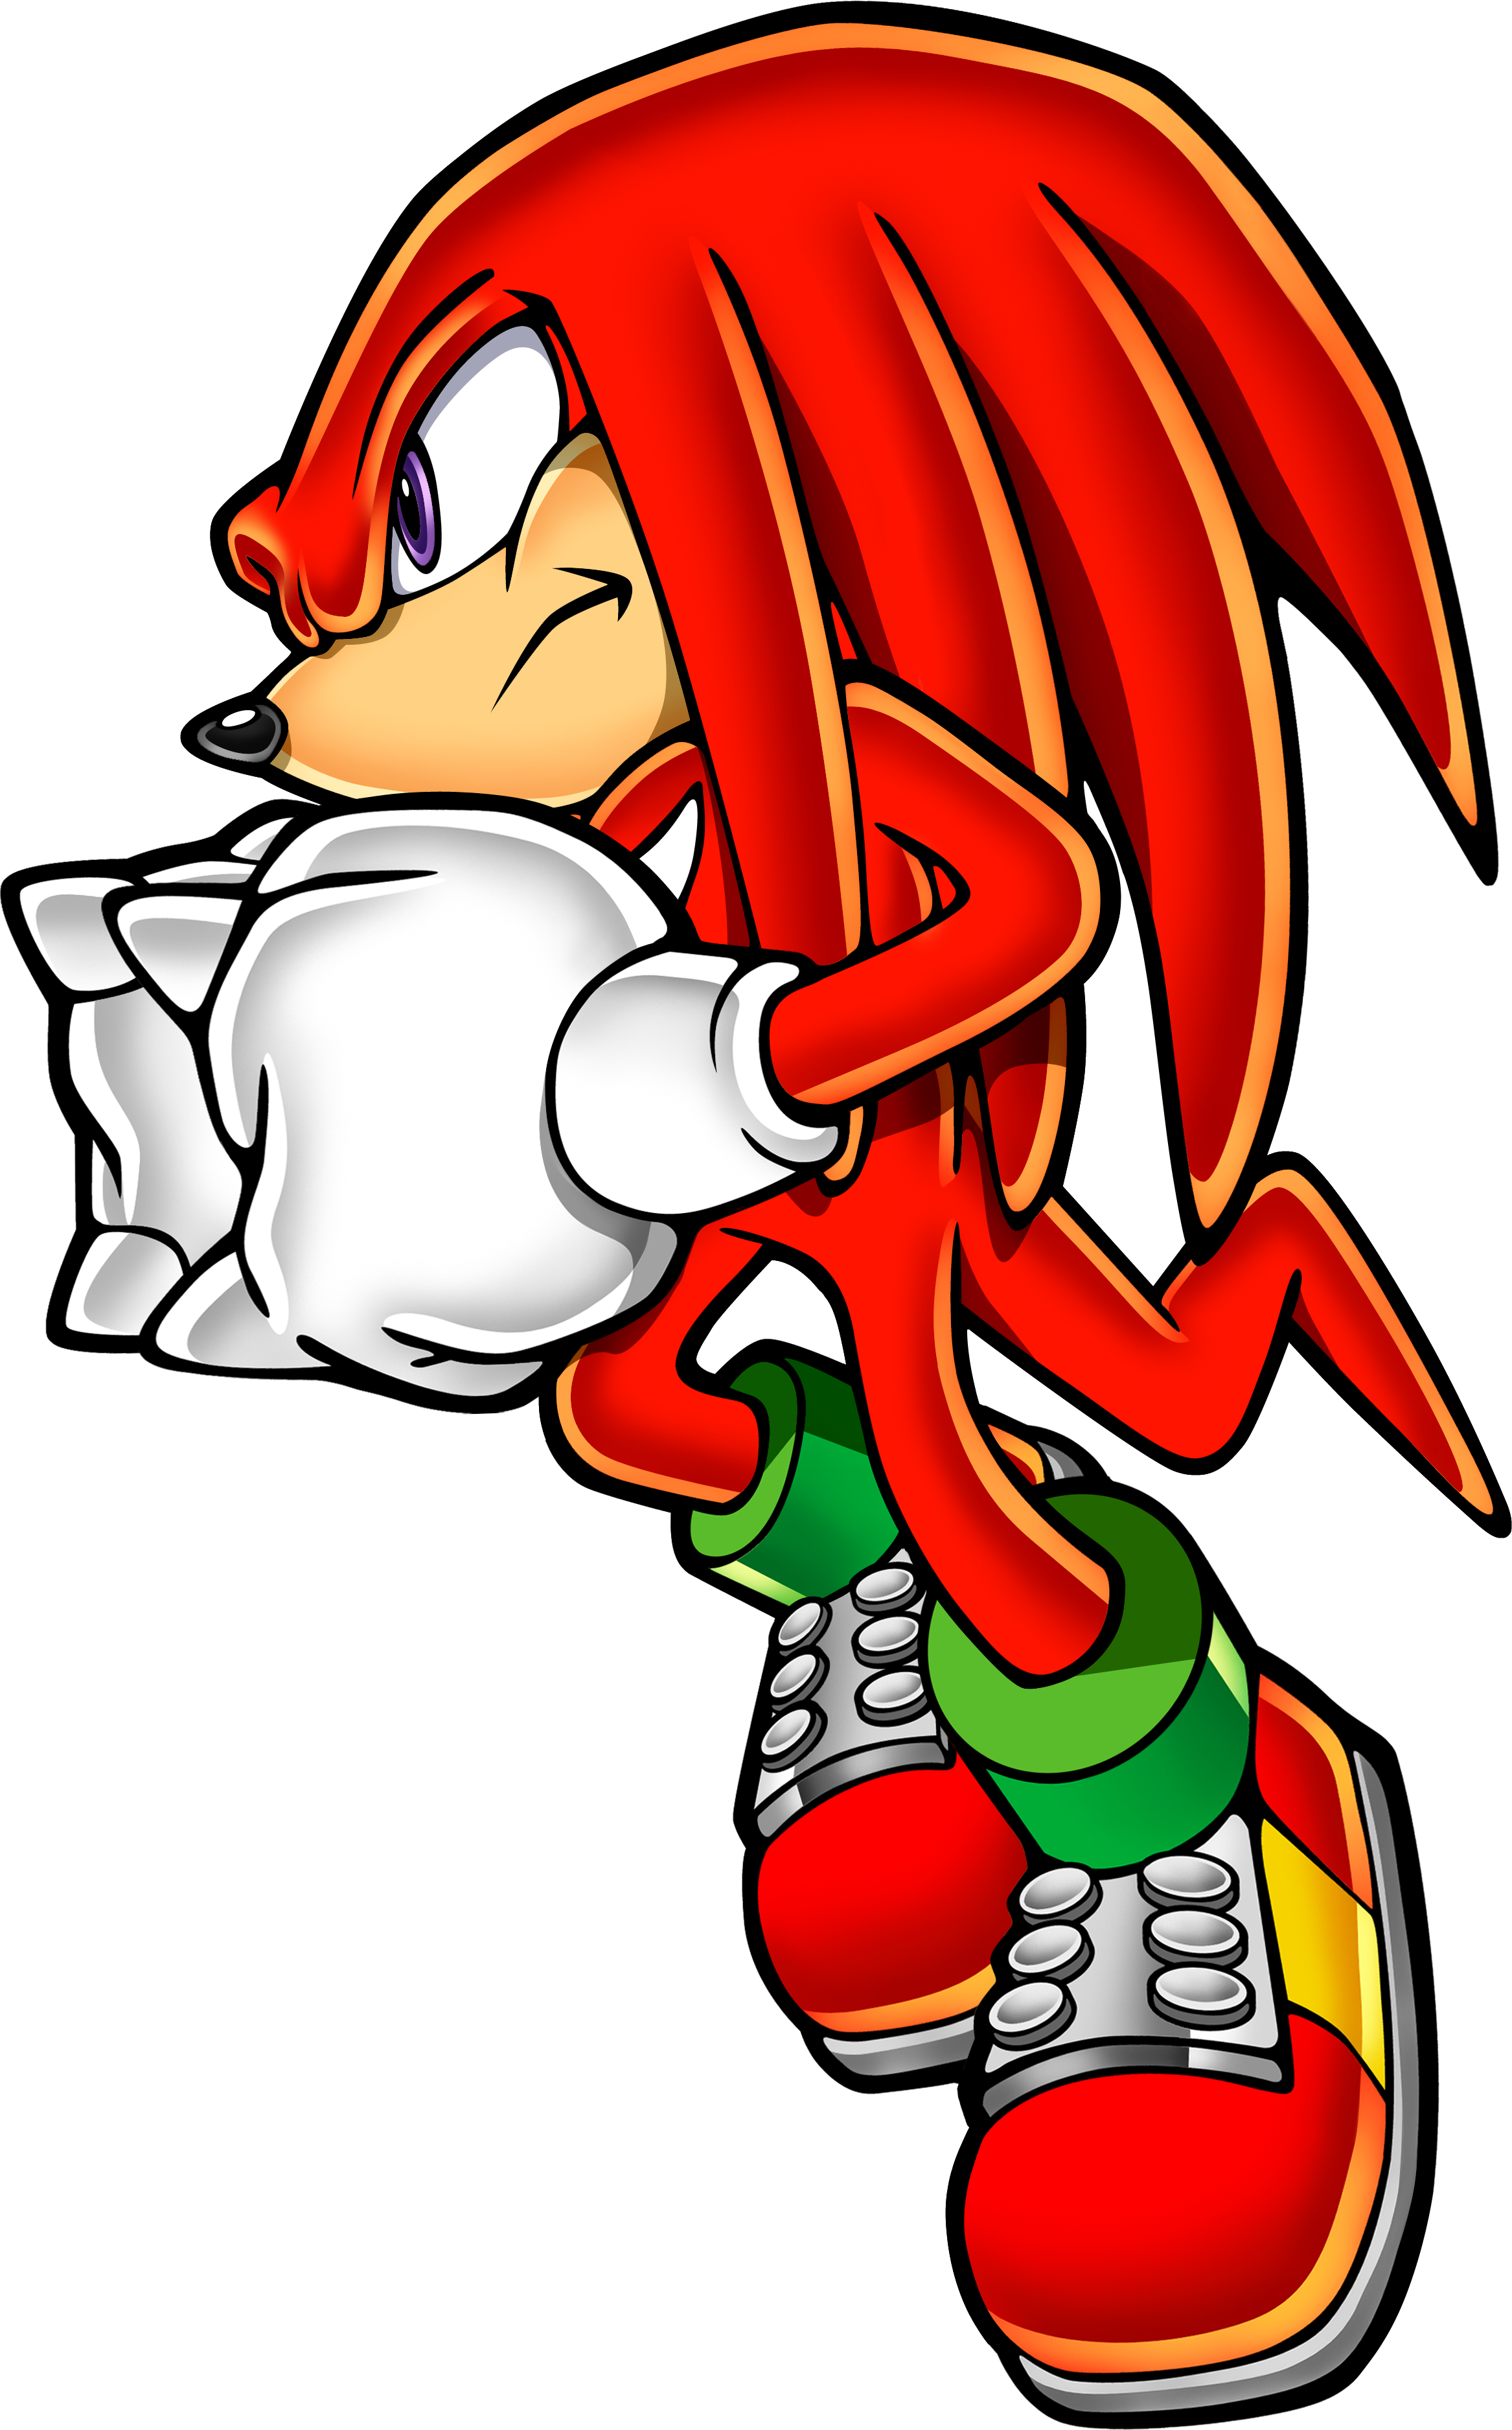 Image - Sonic Art Assets DVD - Knuckles - 1.png - Sonic News Network ...